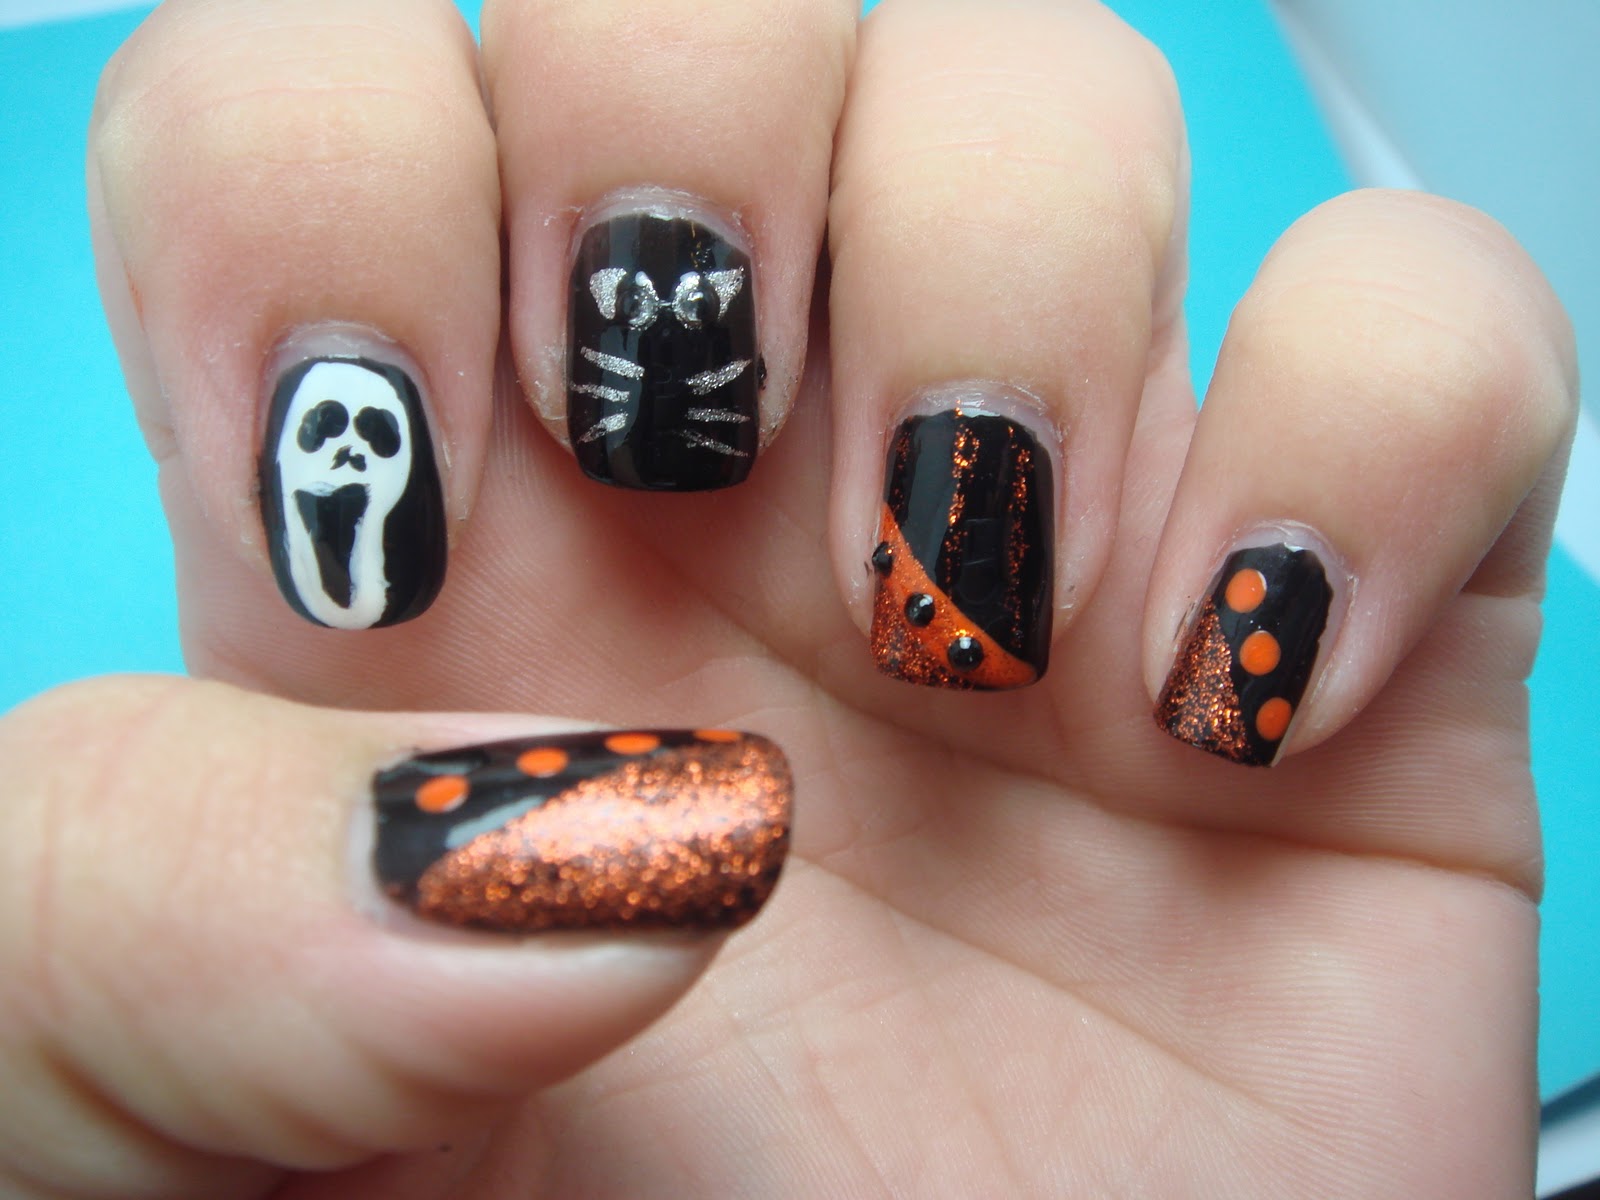 3. Quick and Easy Nail Designs - wide 6